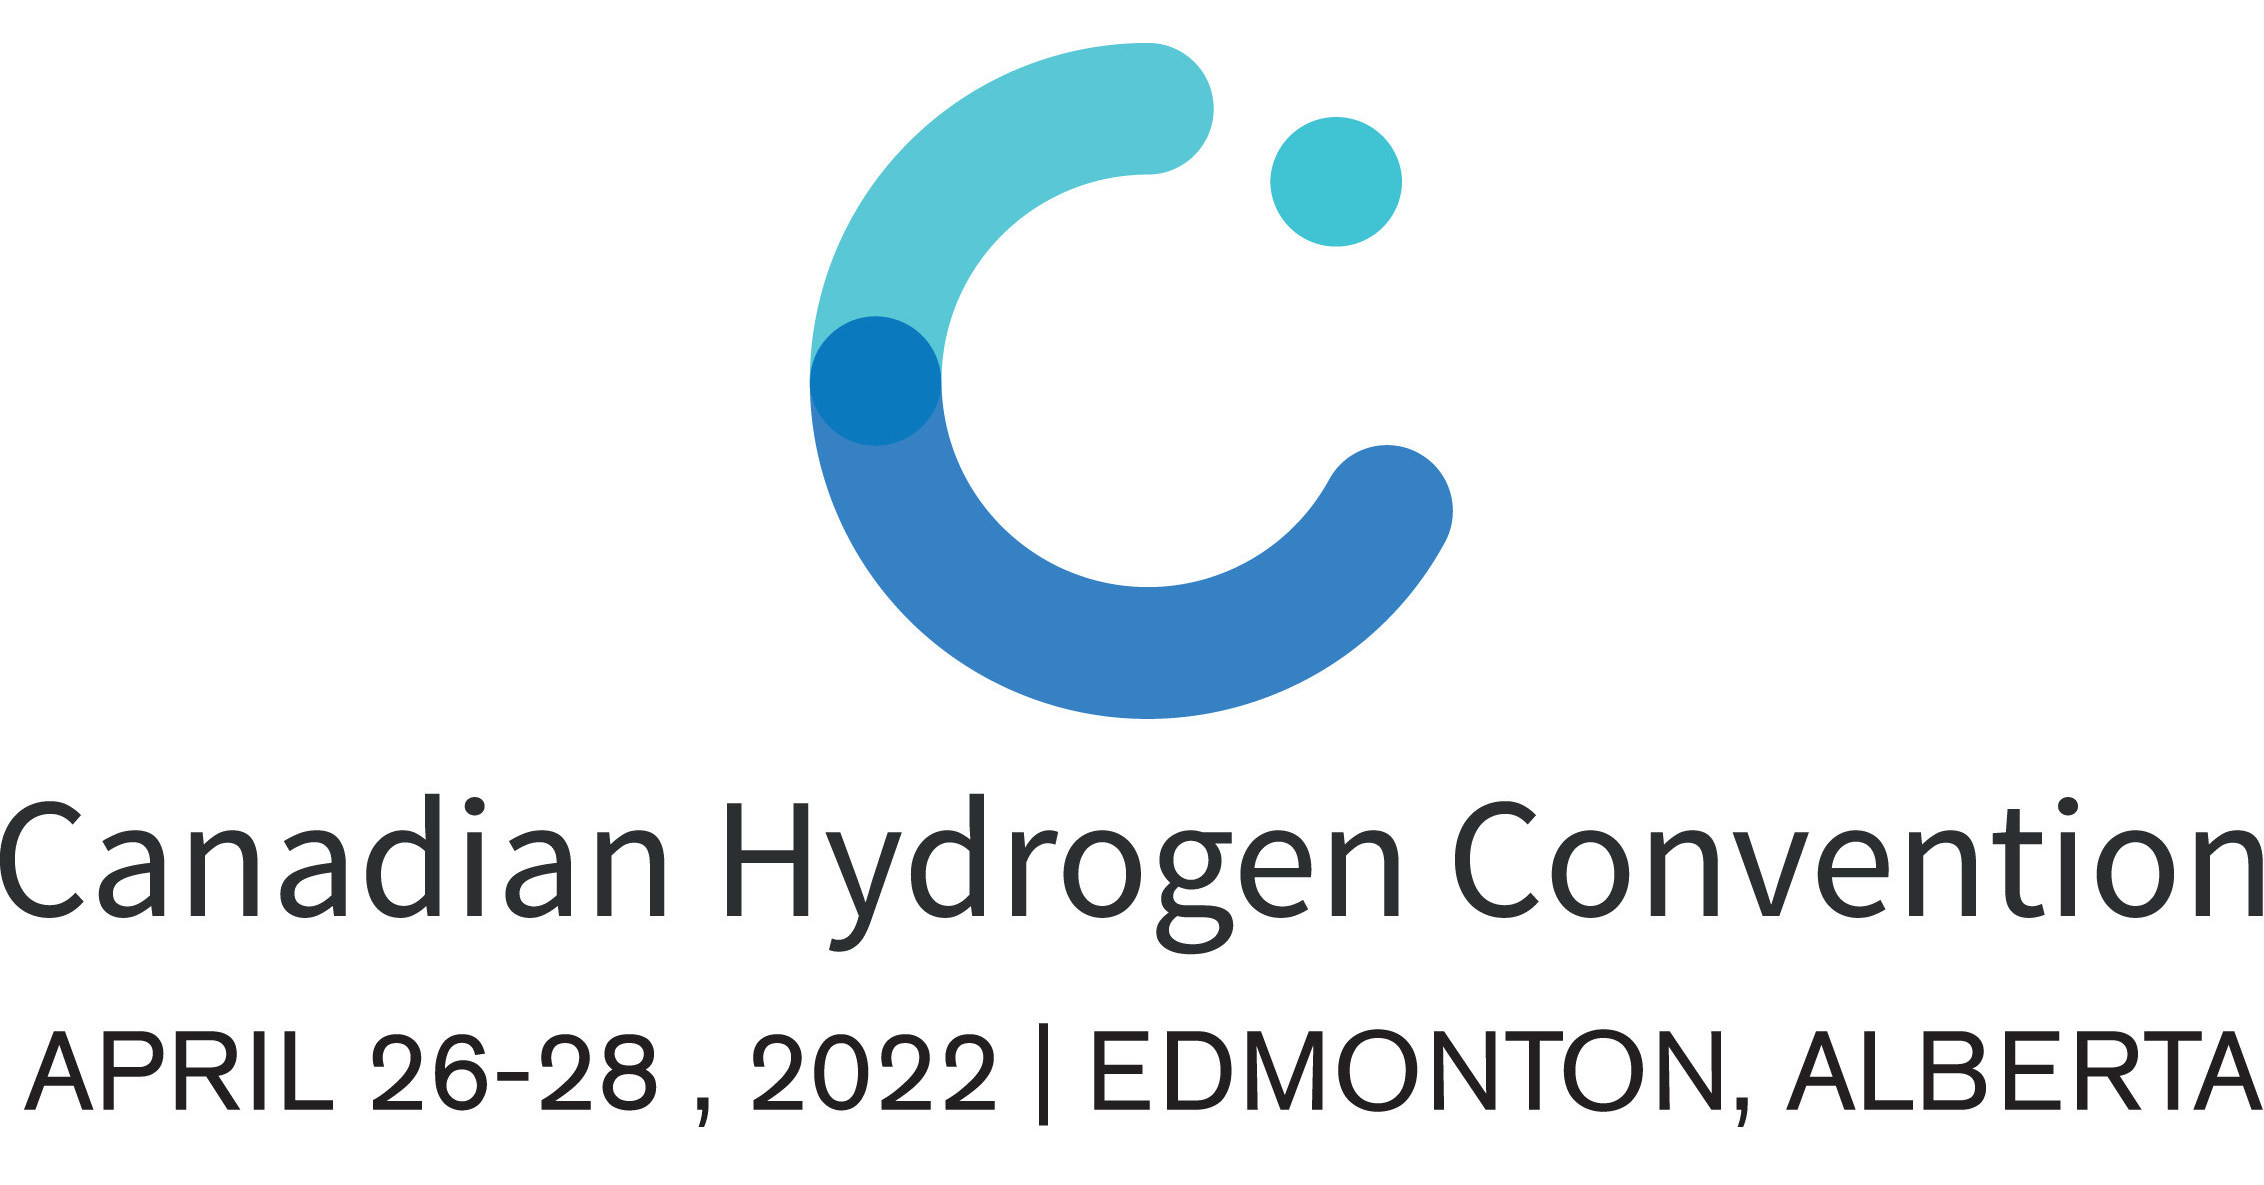 DMG EVENTS LAUNCHES CANADIAN HYDROGEN CONVENTION IN EDMONTON GLOBAL ENERGY LEADERS